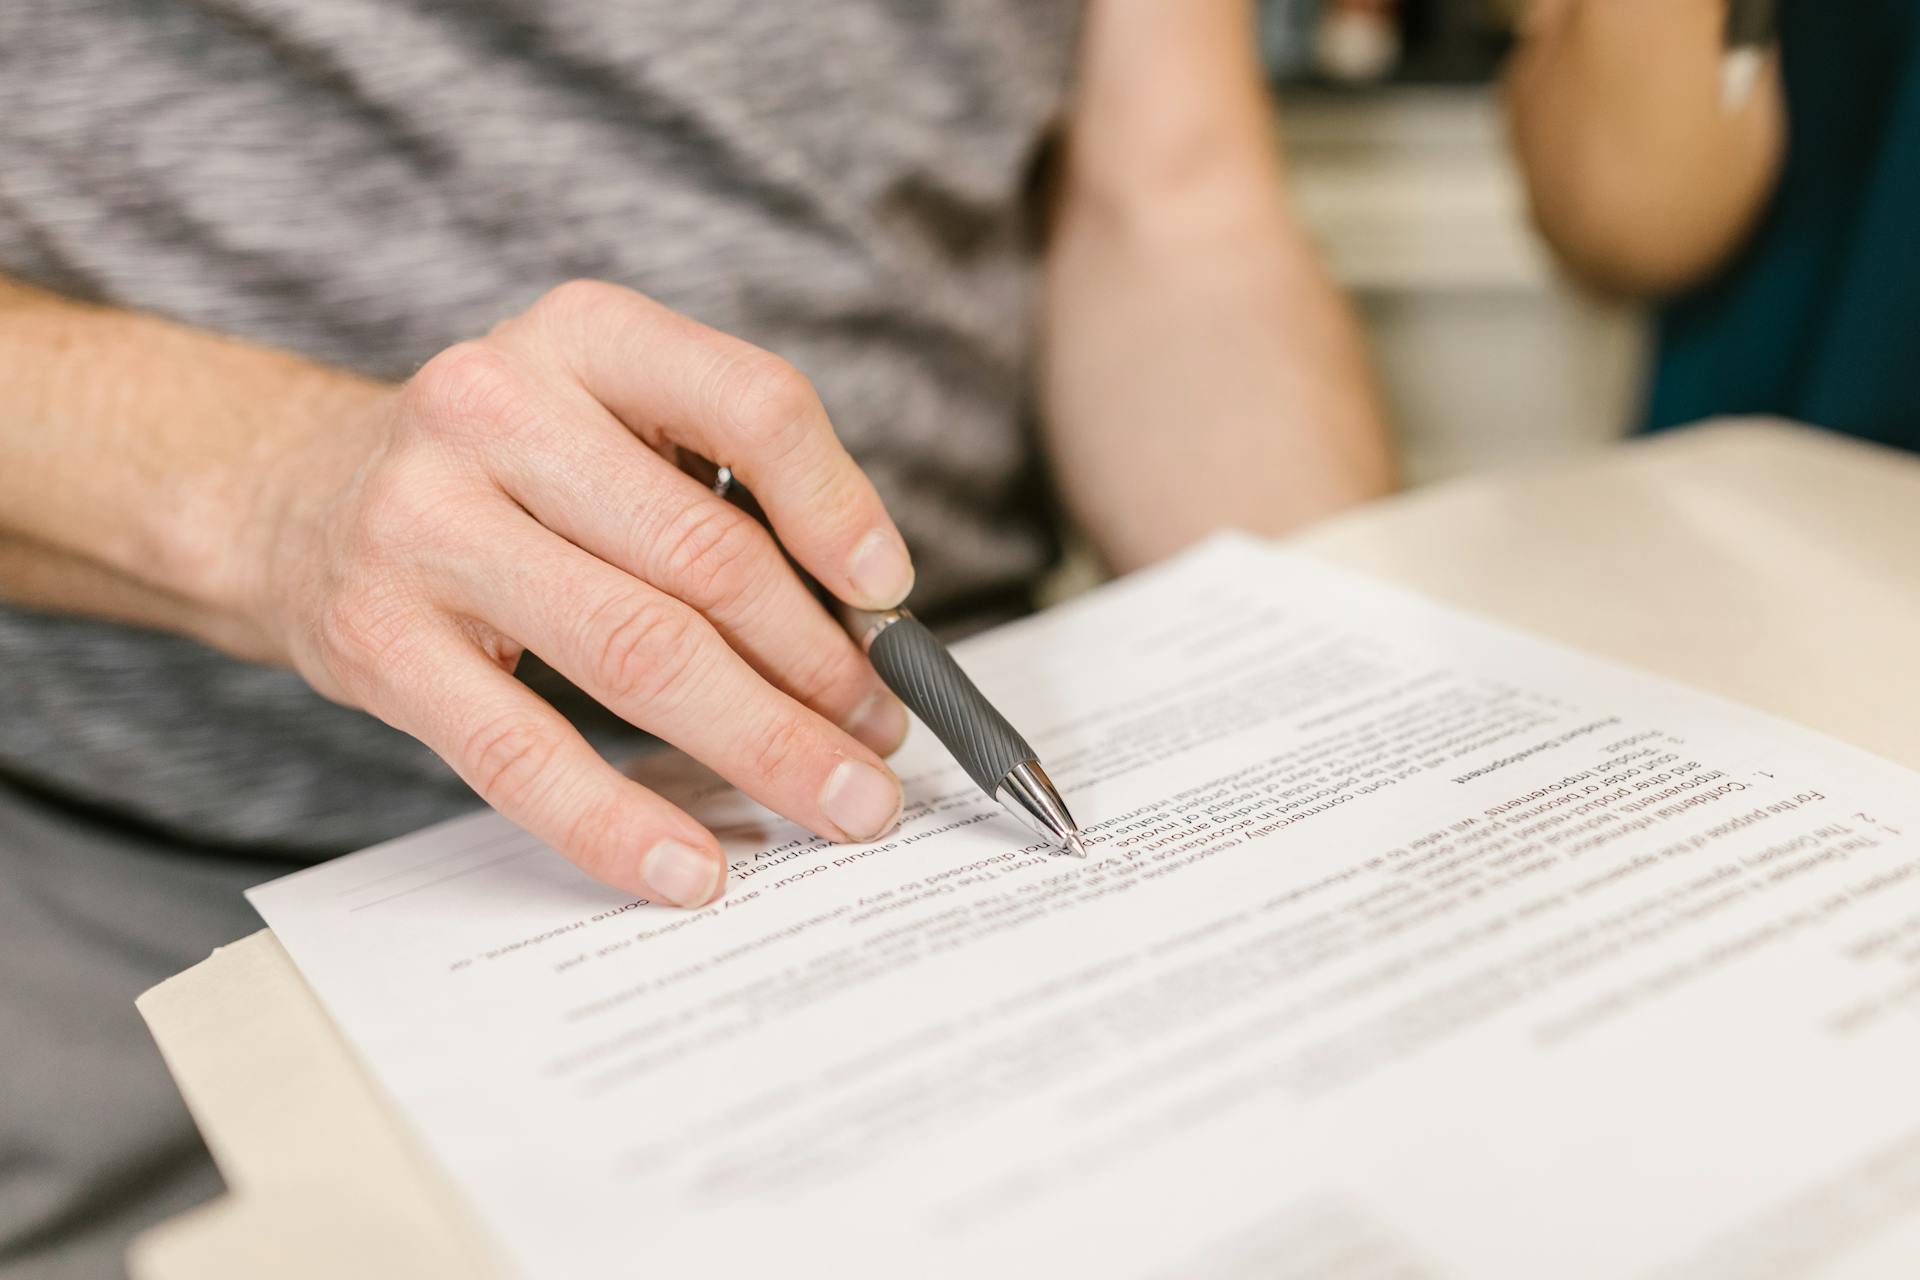 Person holding a pen over legal documents | Source: Pexels